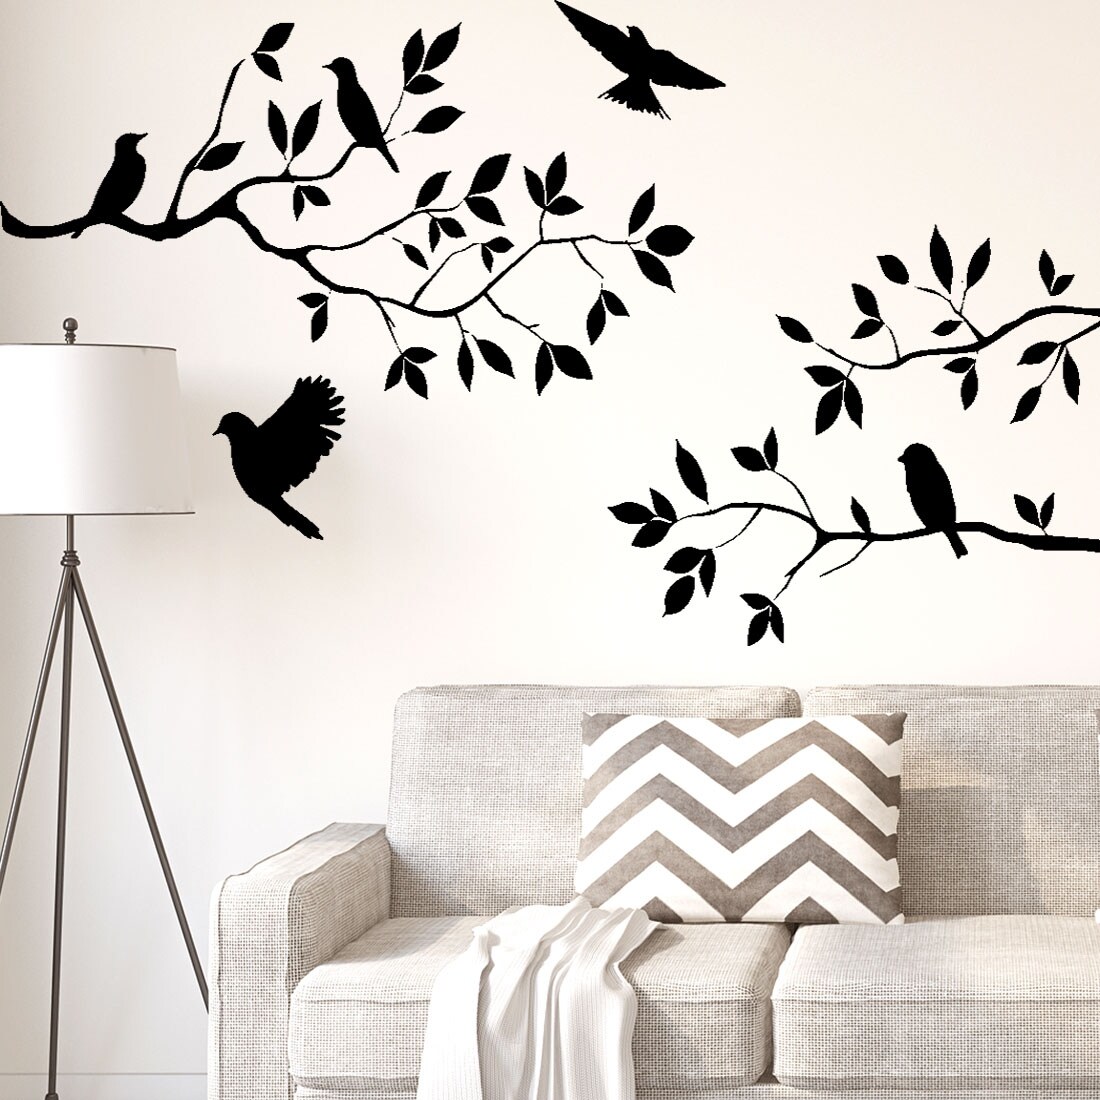 SOME BIRDS WALL ART INSPIRATIONAL QUOTE STICKER MURAL LIVING ROOM DINING ROOM 